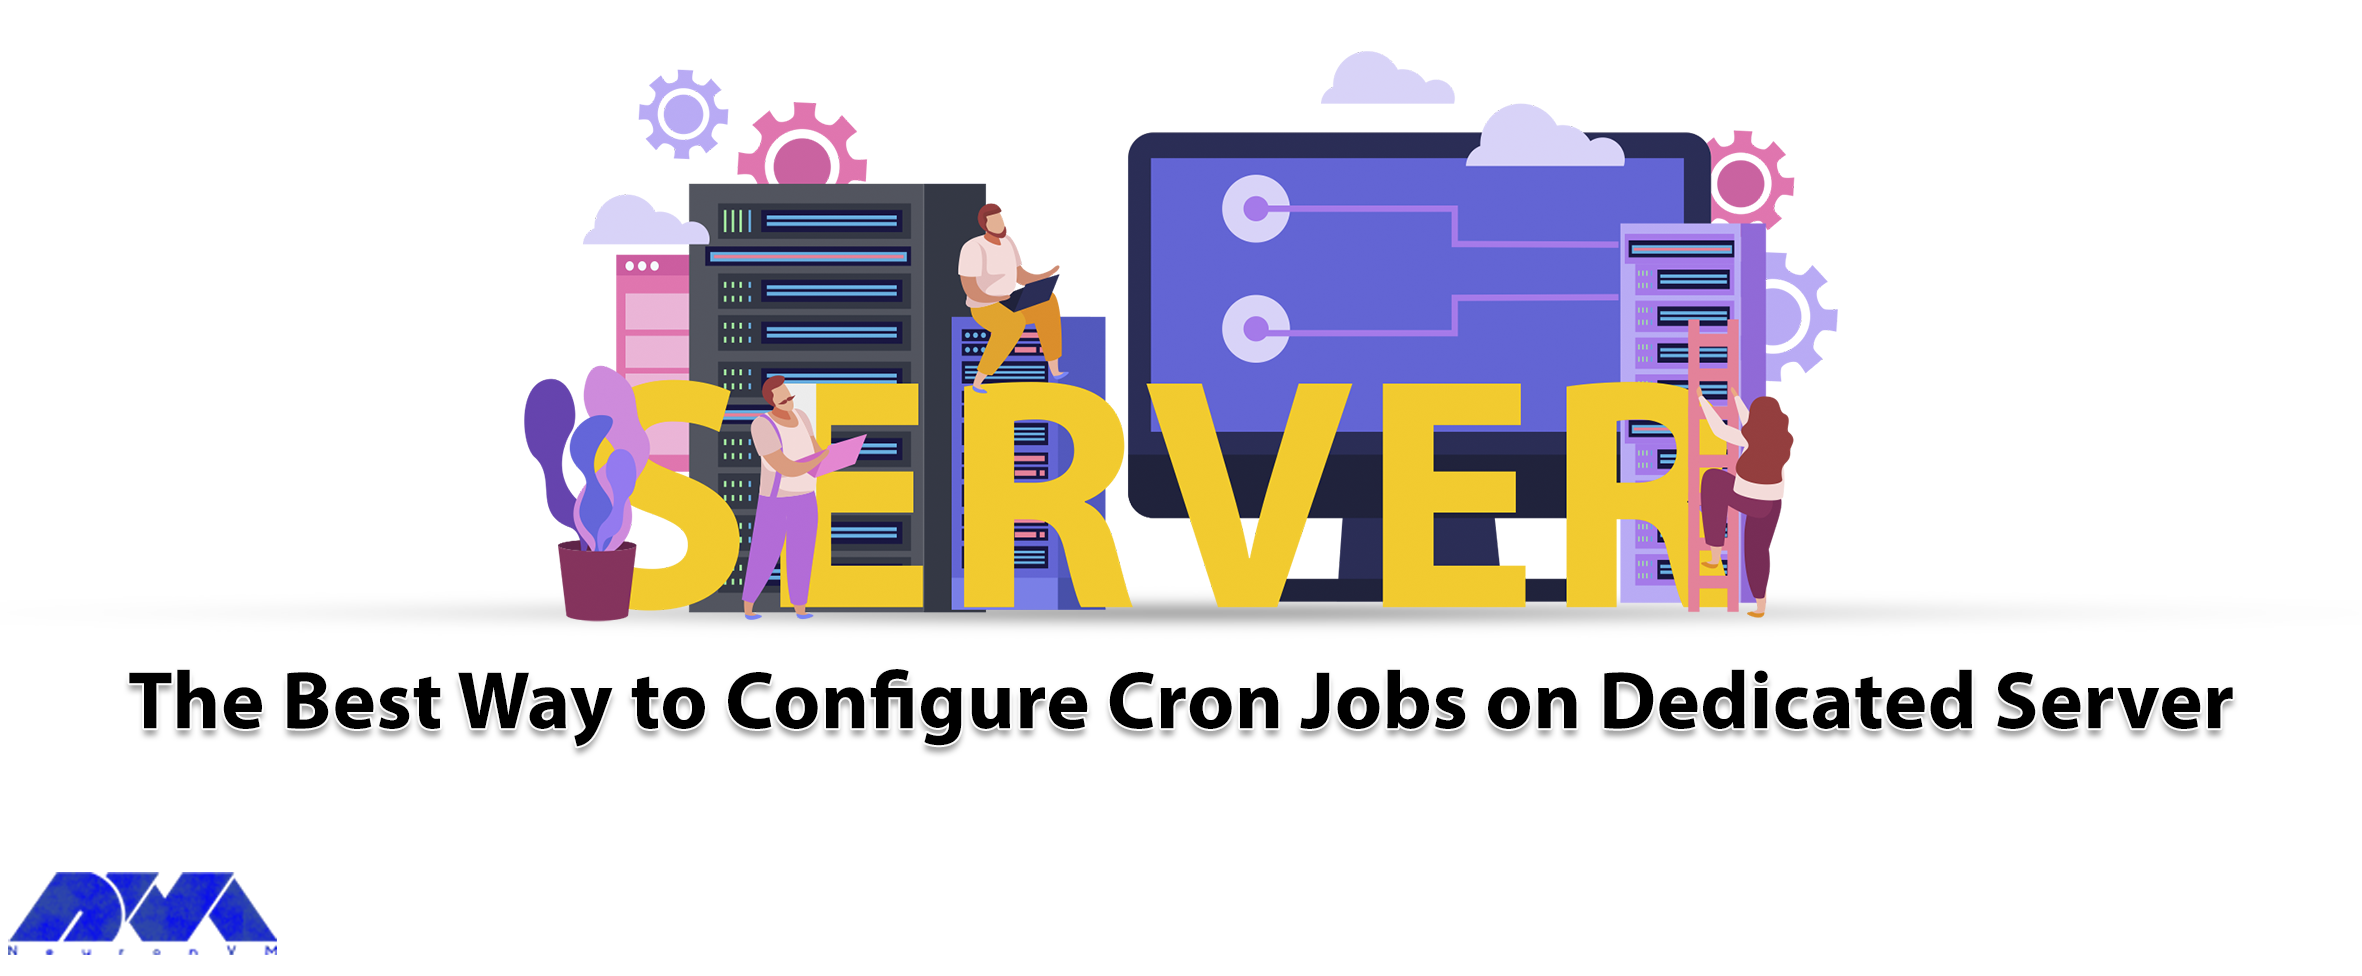 The Best Way to Configure Cron Jobs on Dedicated Server - NeuronVM